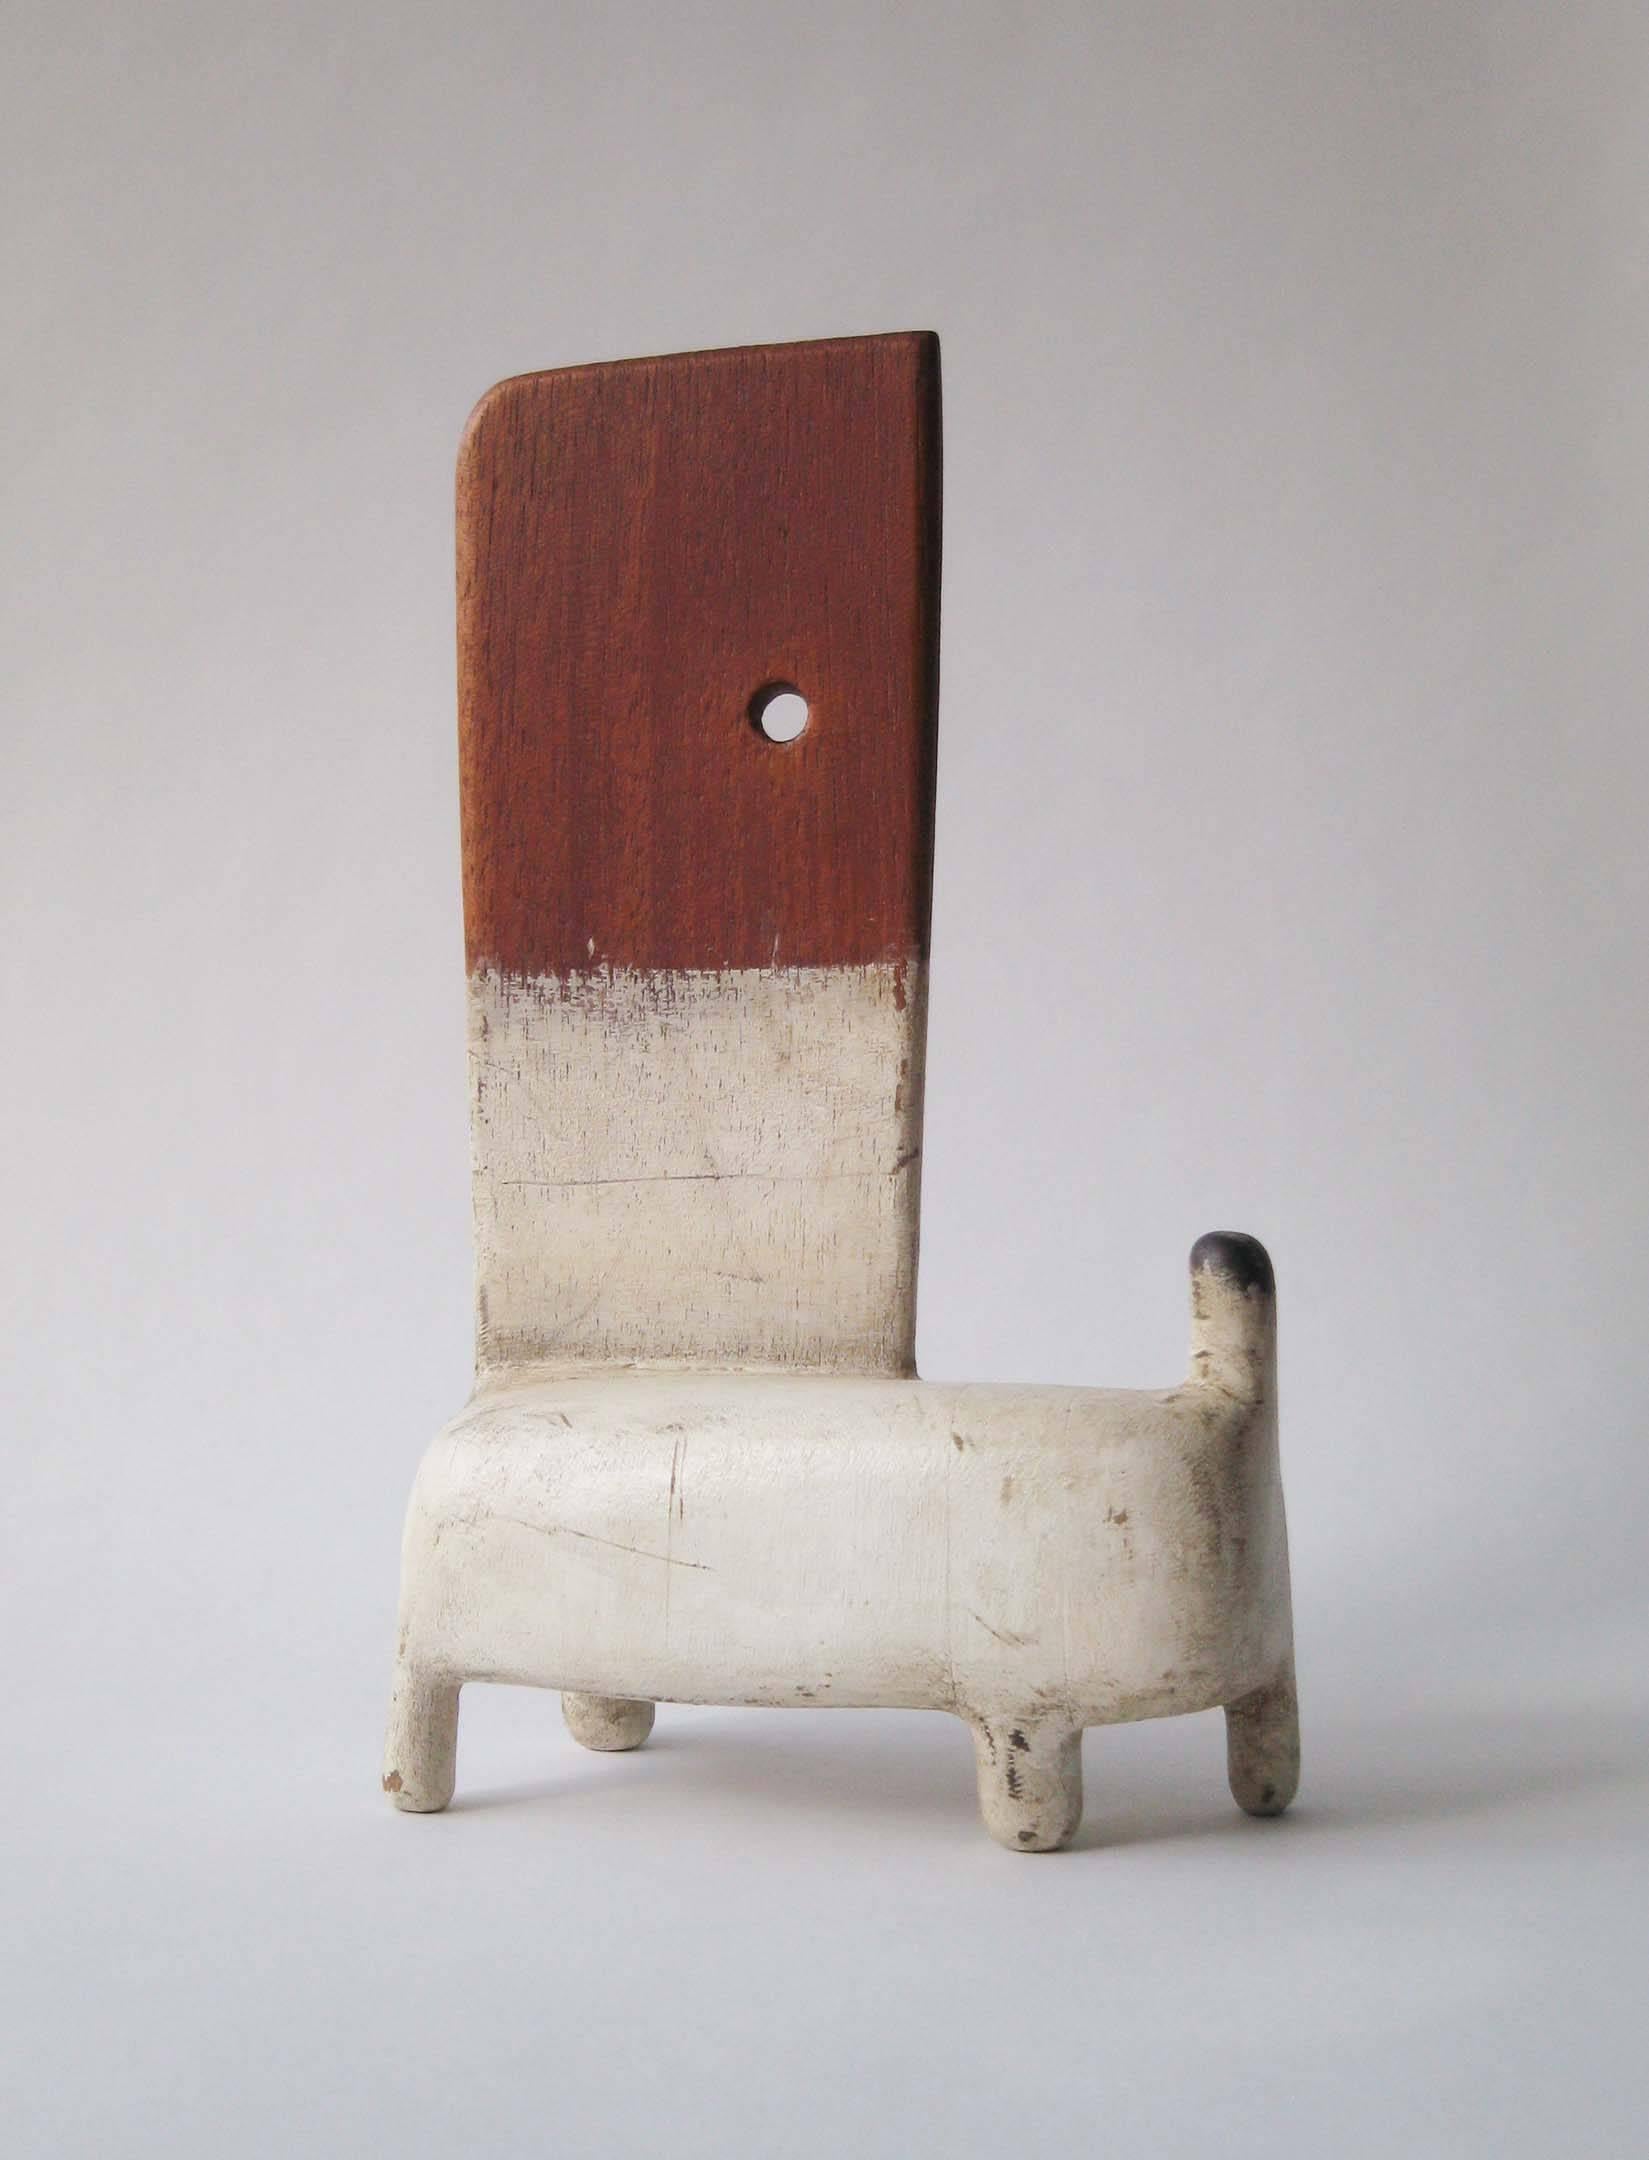 Jay Kelly Abstract Sculpture - Untitled #412